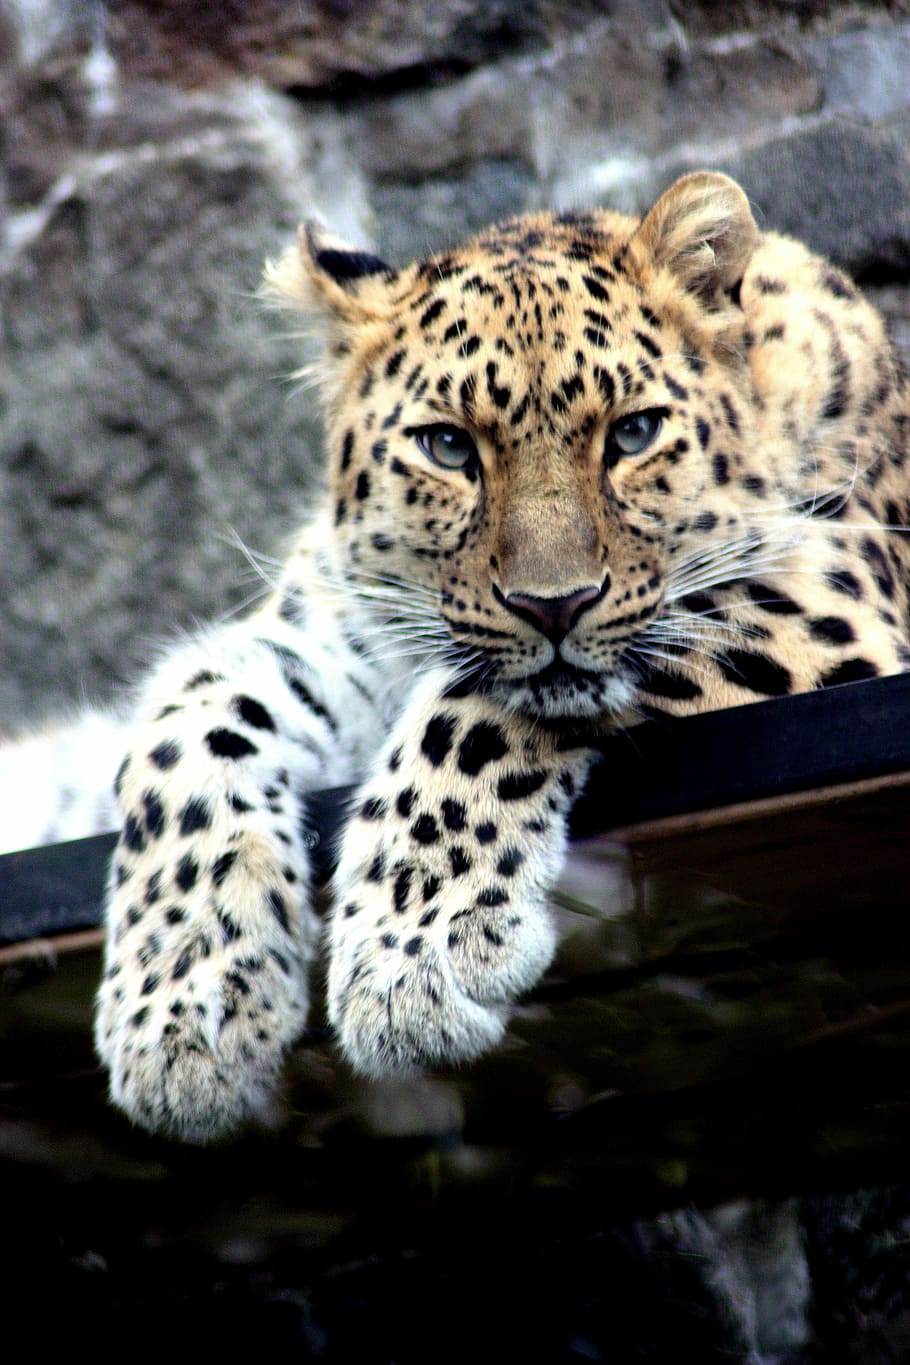 Leopard laying on a black metal frame during day time, wildlife